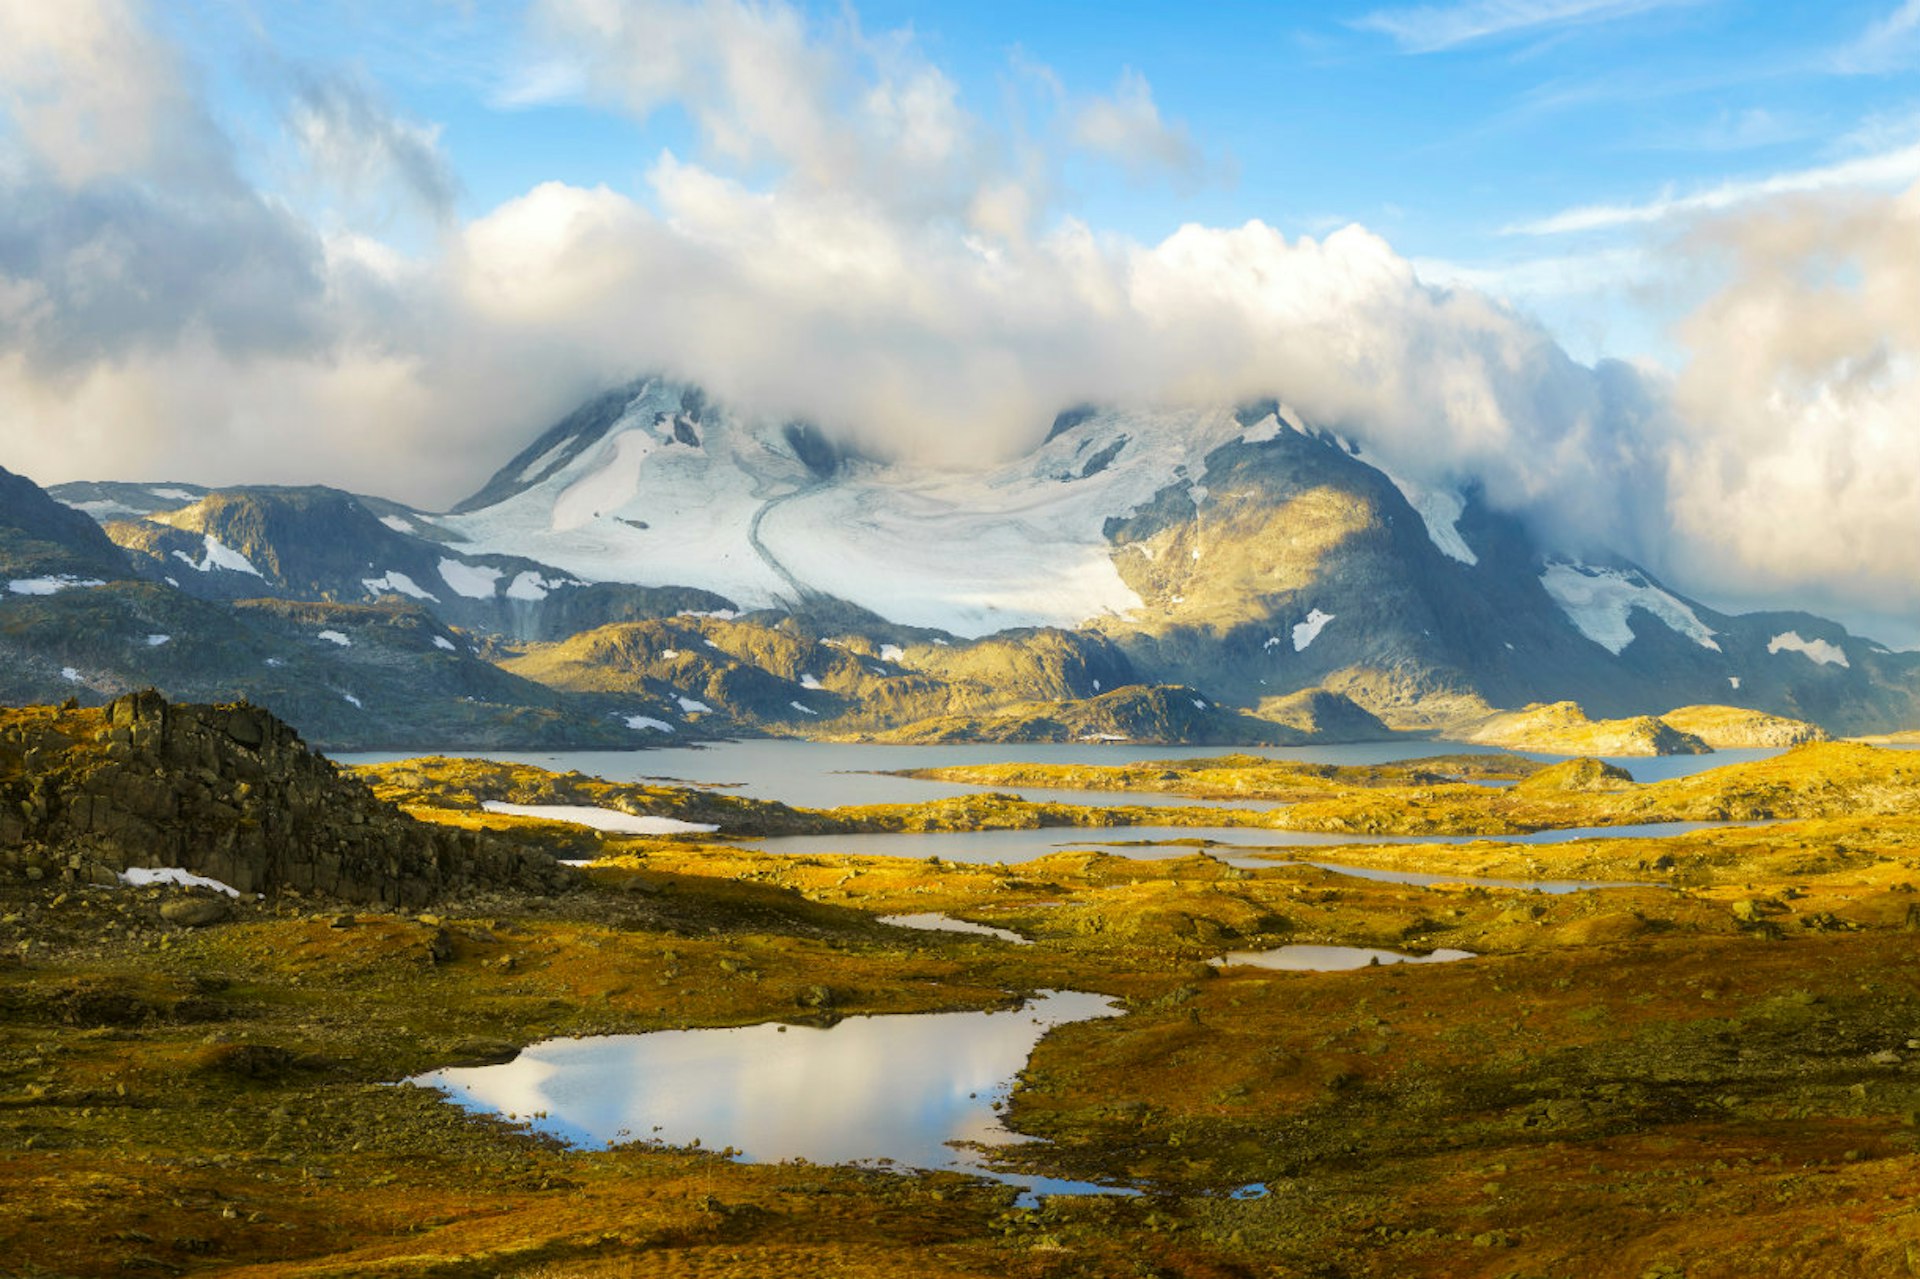 Jotunheimen National Park , or 'Home of the Giants' is one of Norway's most spectacular destinations © kiszon pascal / Getty Images